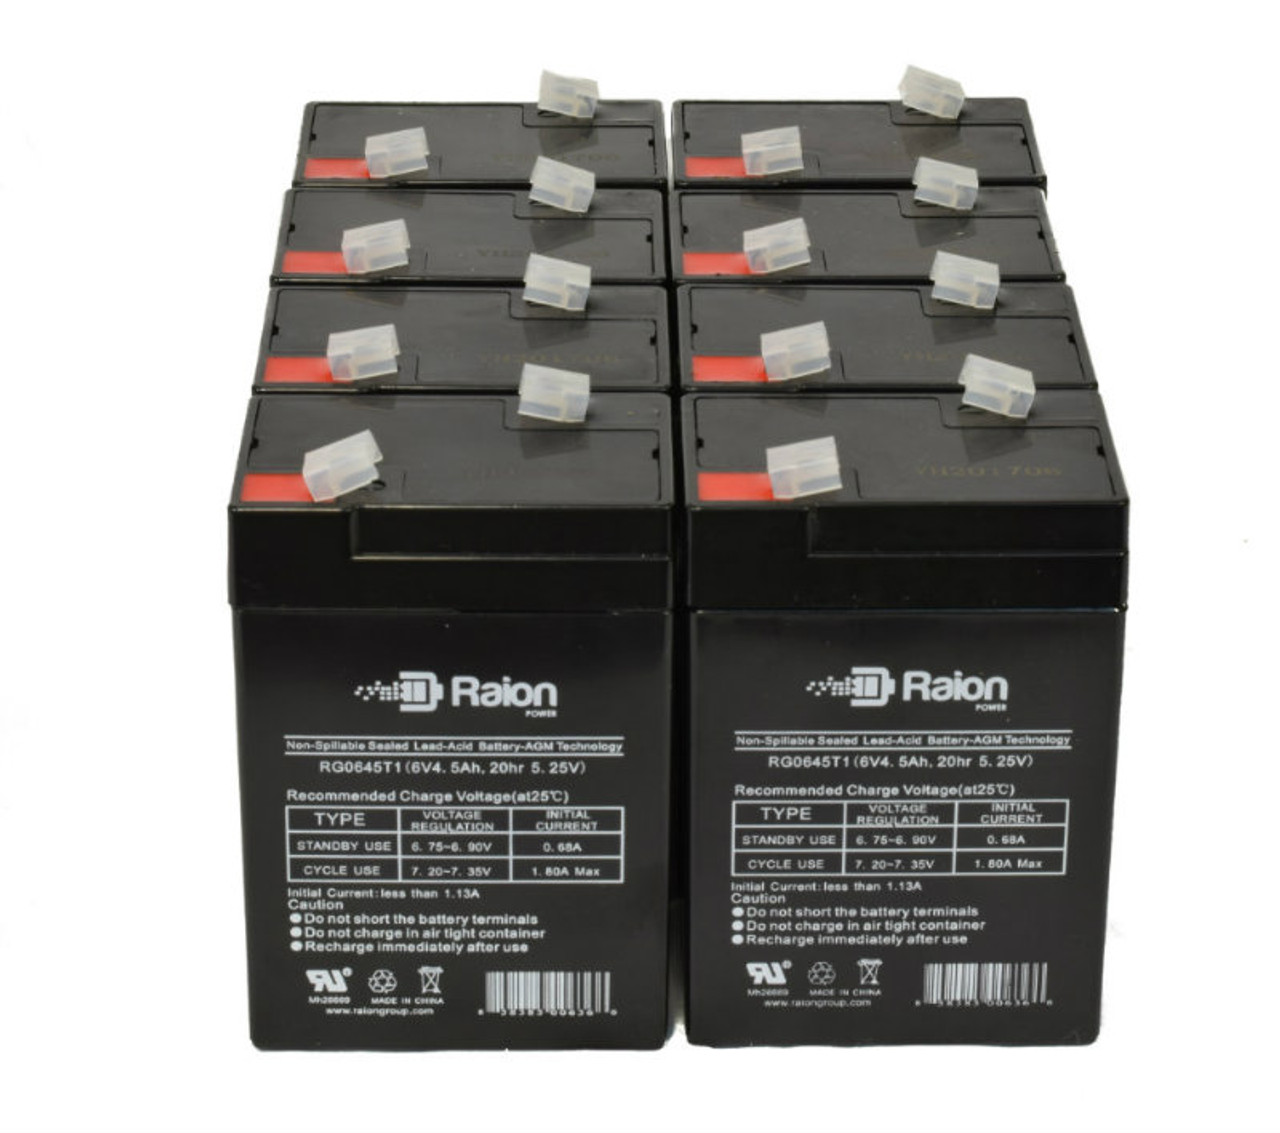 Raion Power 6 Volt 4.5Ah RG0645T1 Replacement Battery for Japan PE4-6R - 8 Pack